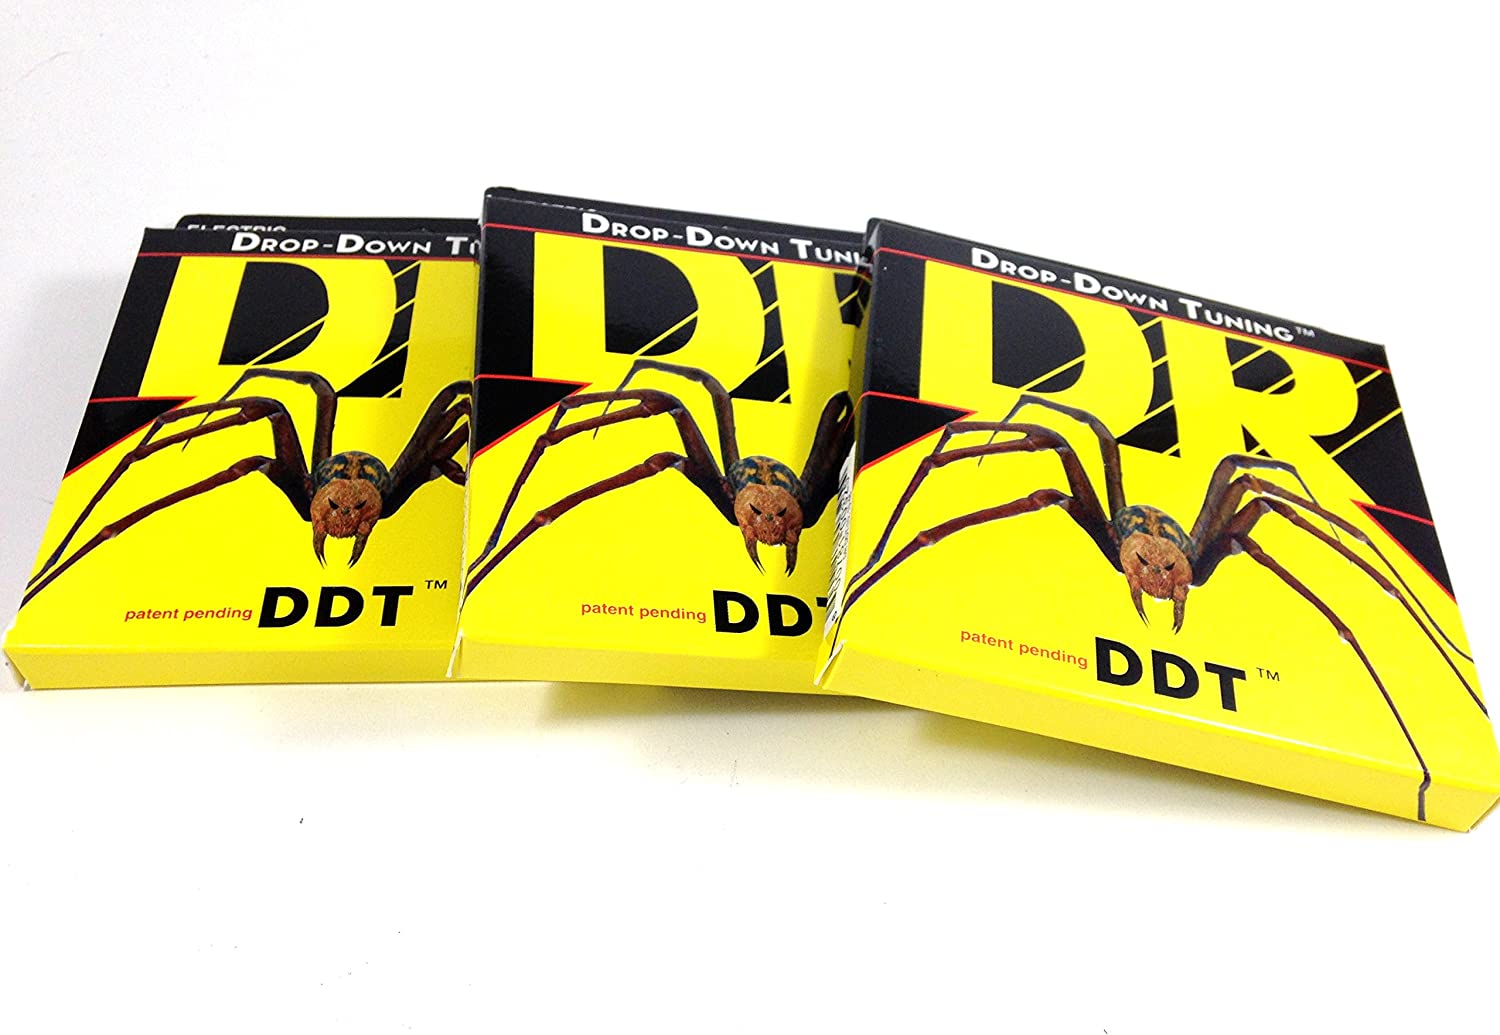 DR Strings DDT Guitar Strings on a white background